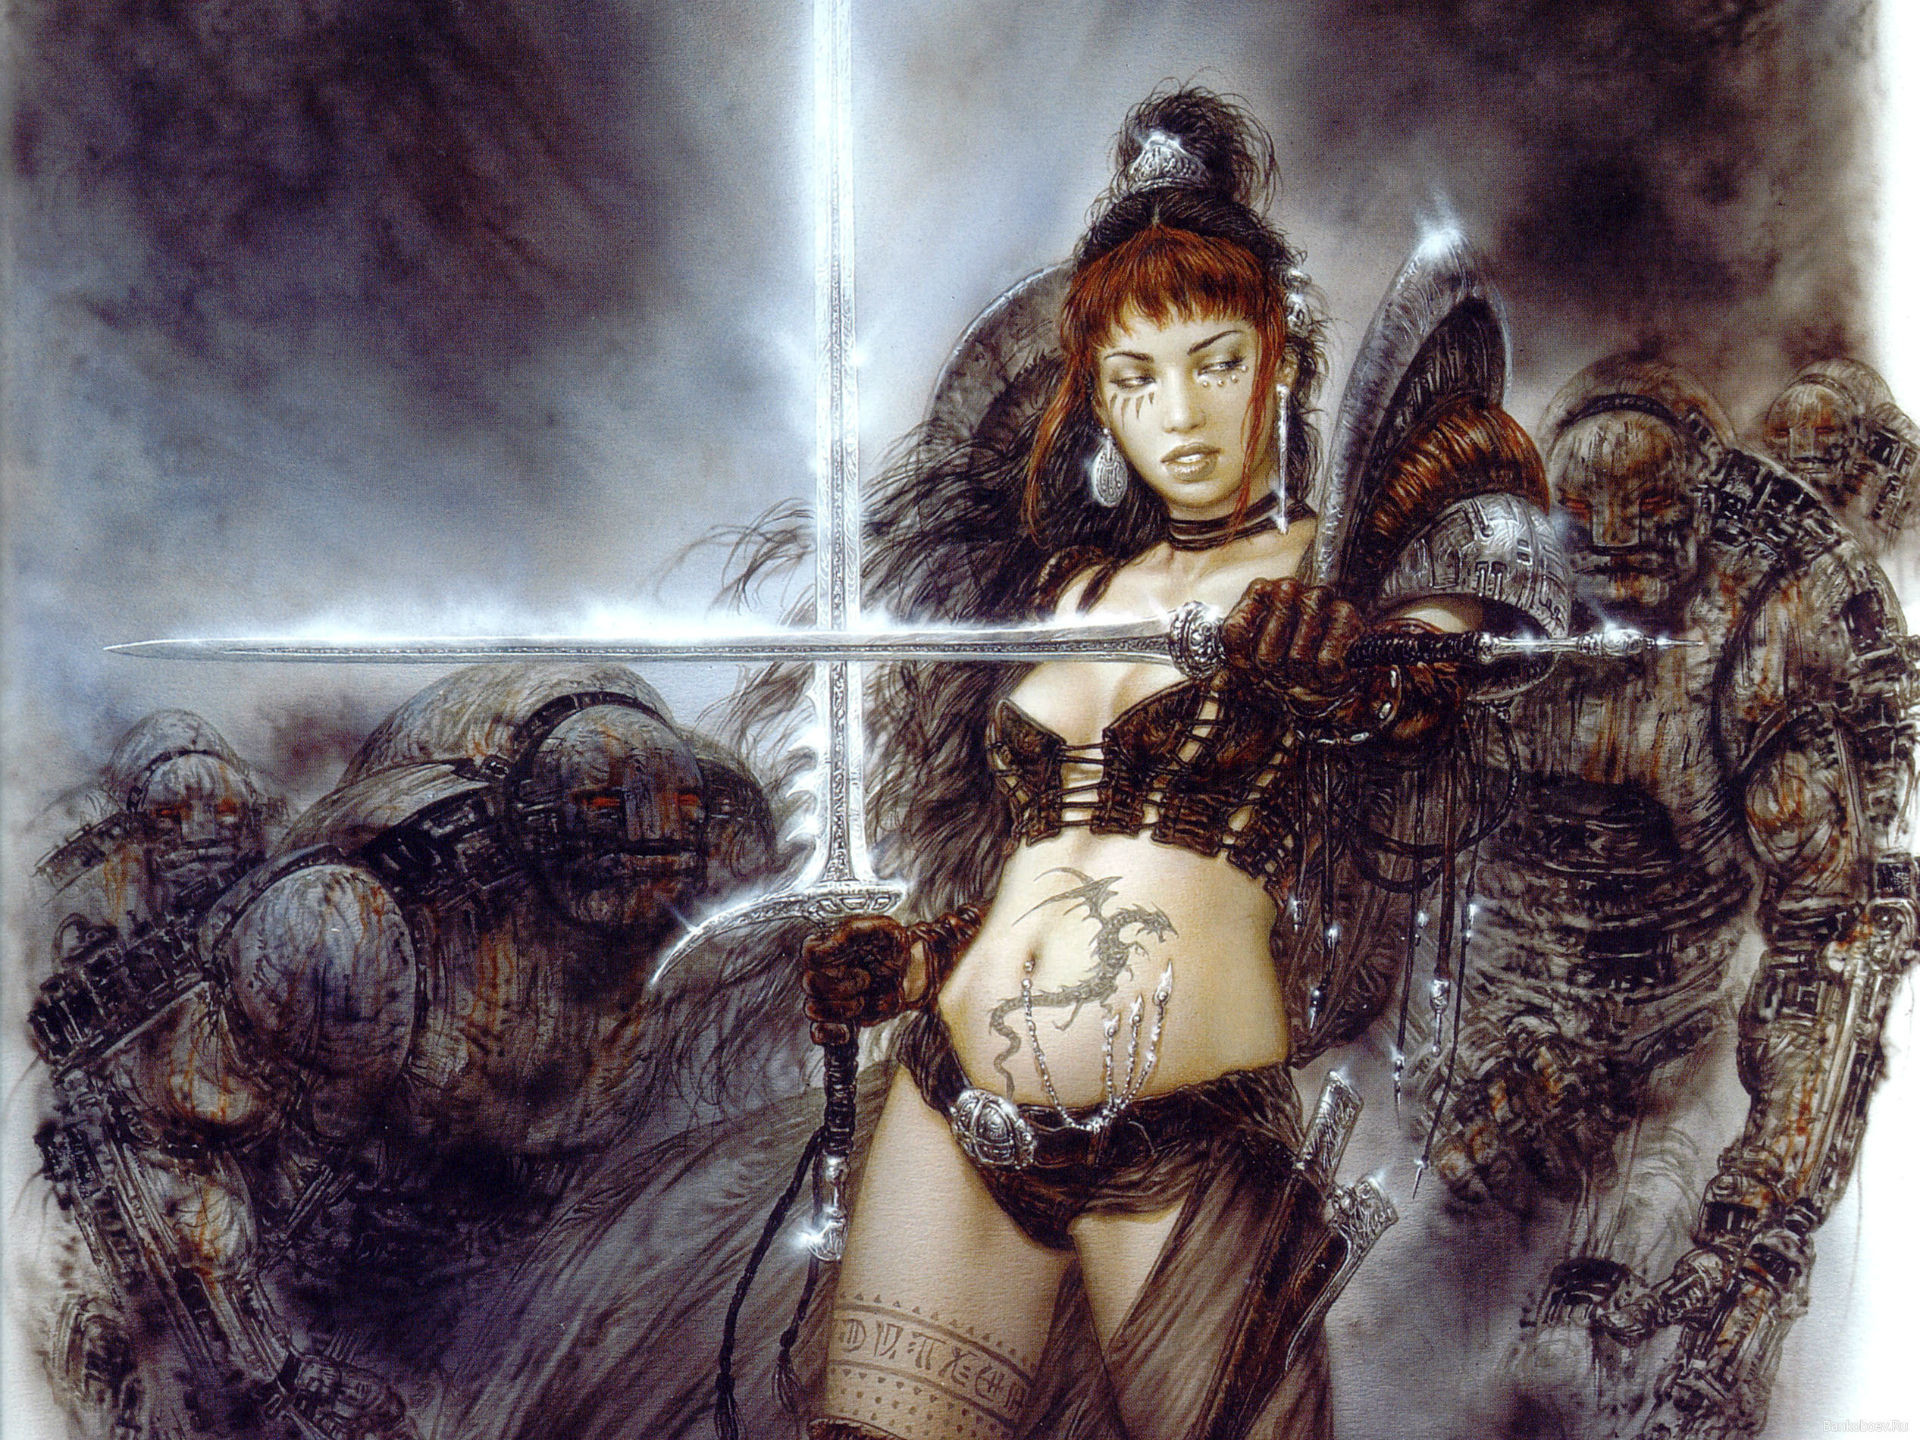 Luis Royo Royo fantasy other warriors females weapons swords other wallpaper 22417 WallpaperUP